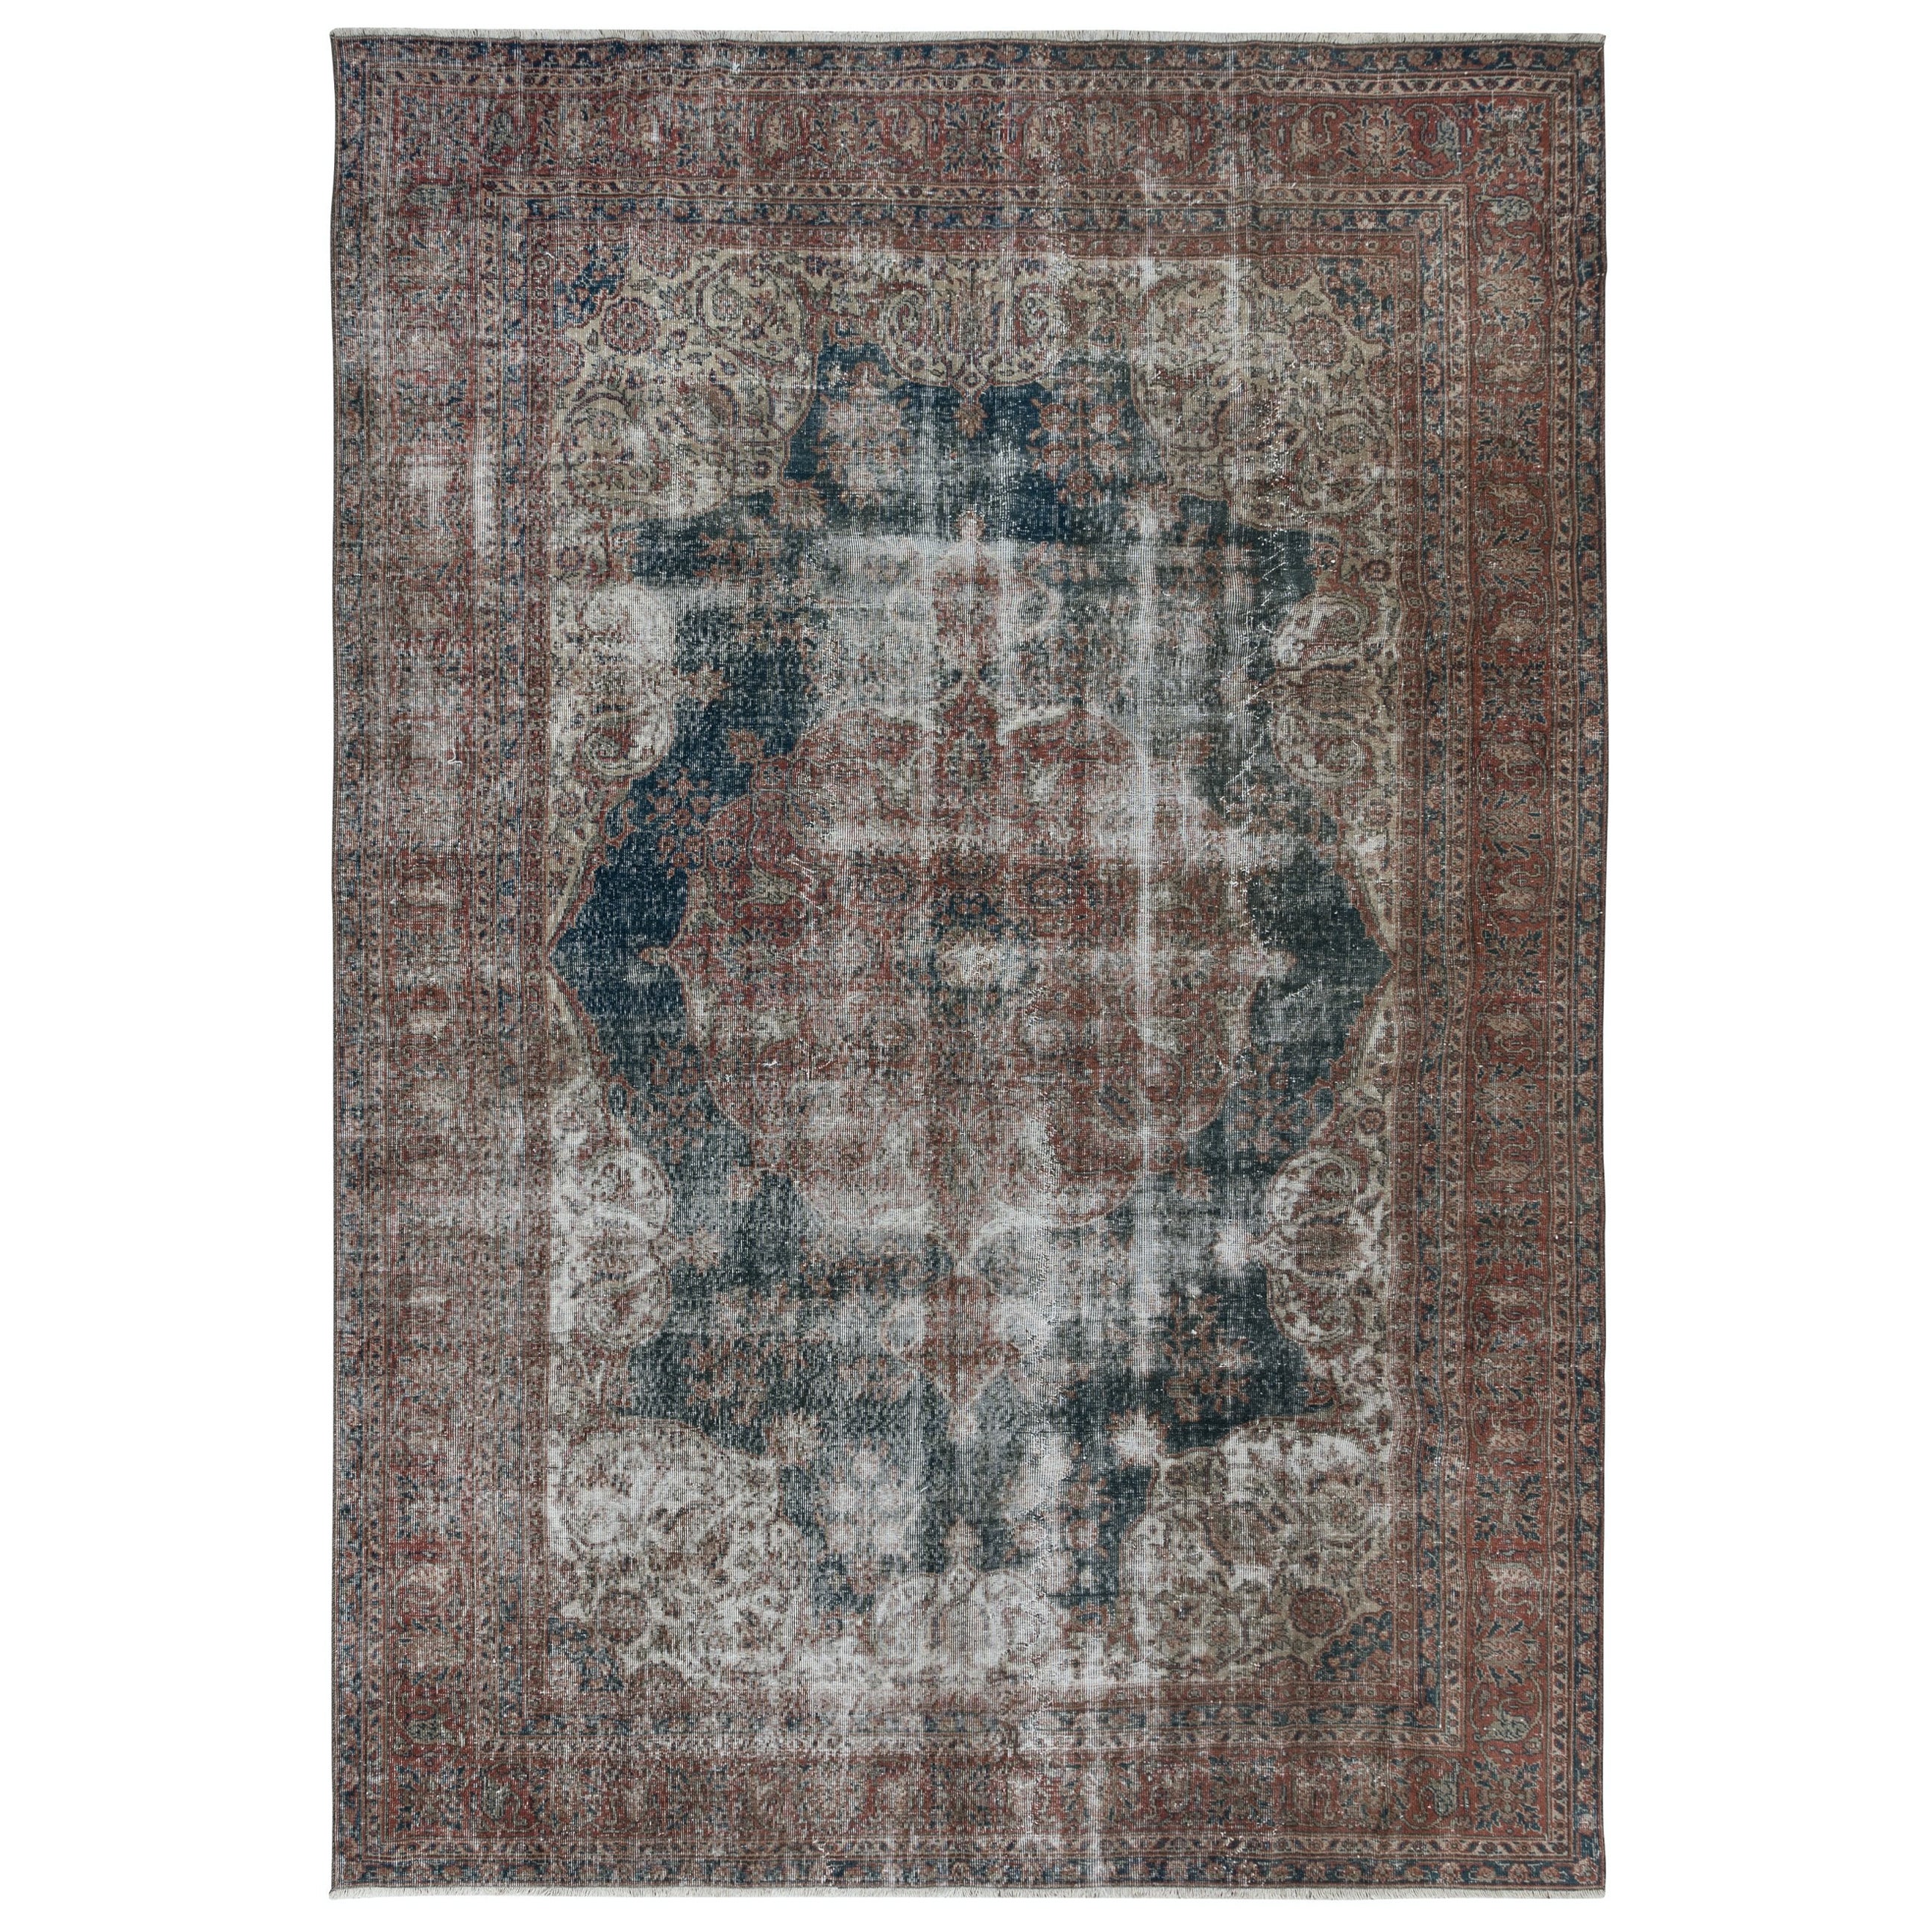 7.7x11 Ft One of a Kind Hand Knotted Turkish Vintage Shabby Chic Large Area Rug For Sale